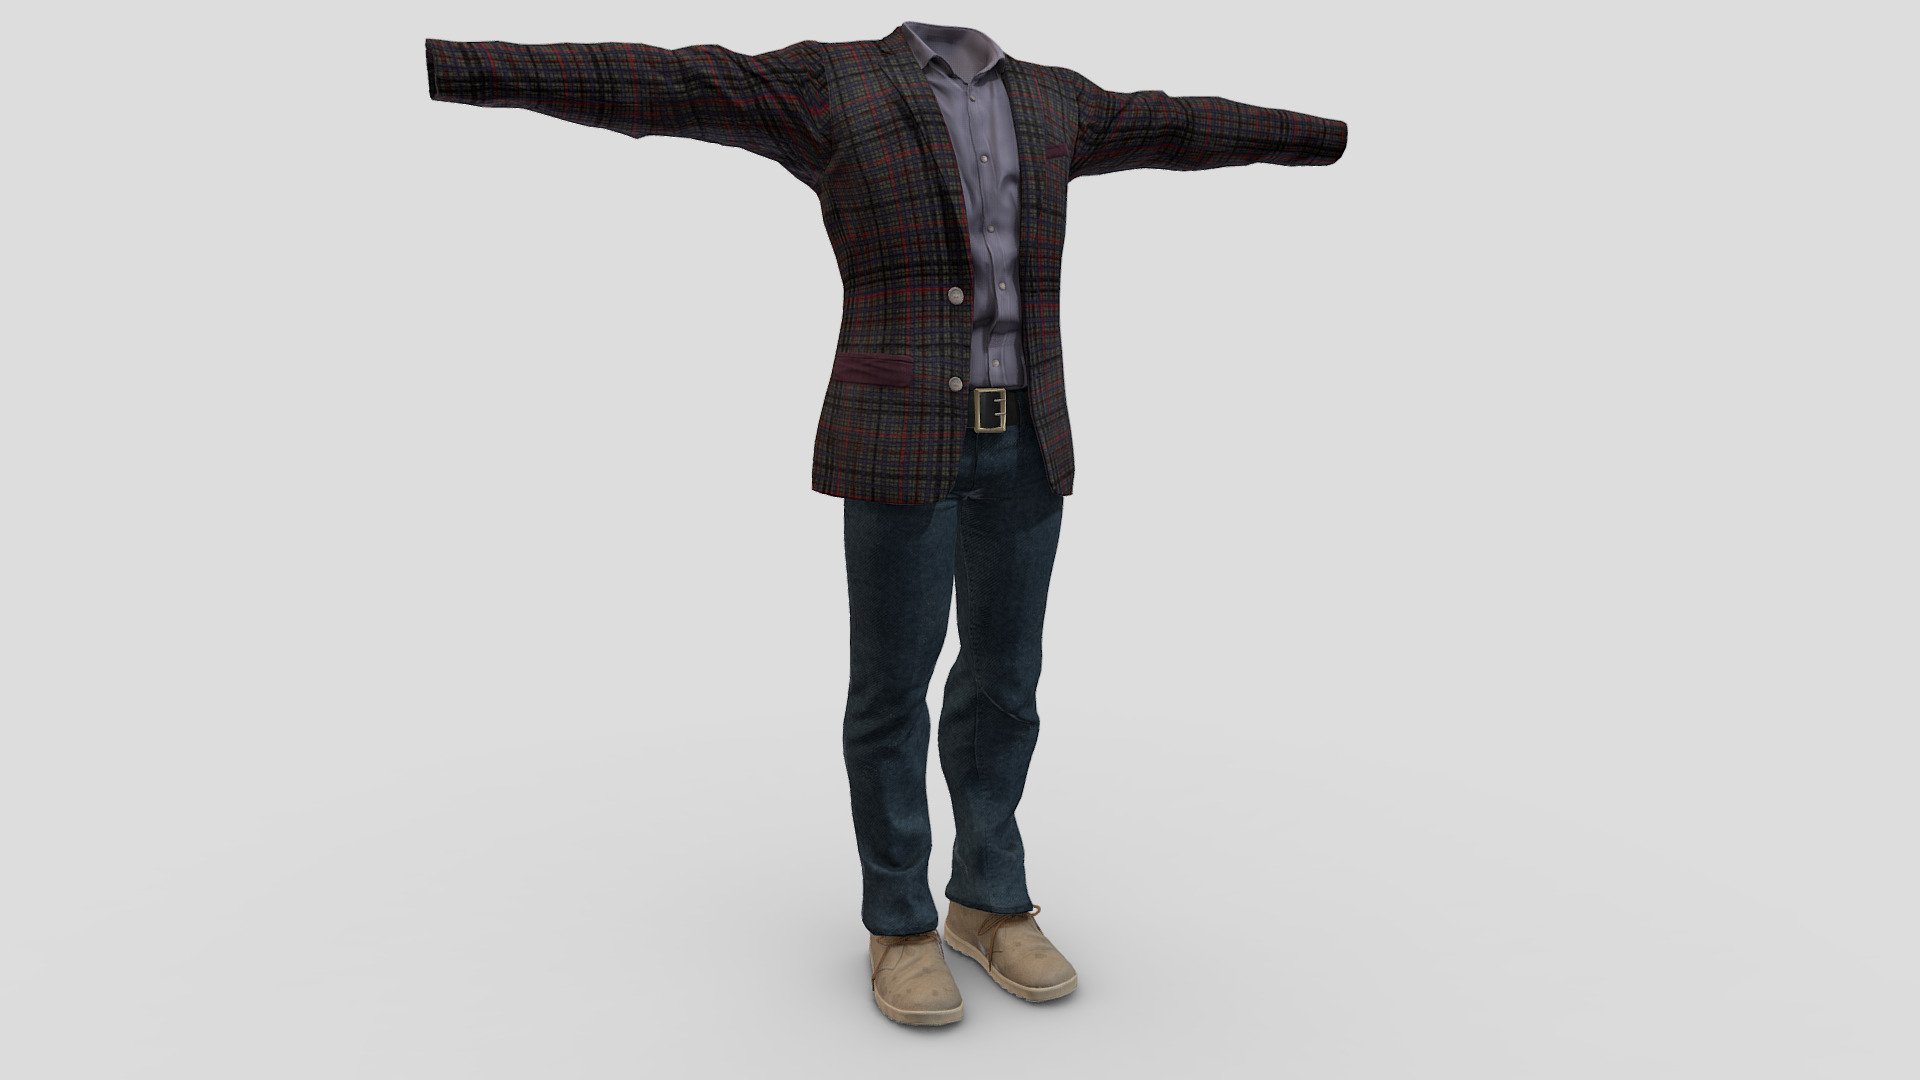 Jackt + Shirt + Pants + Shoes

Can fit to any character

Ready for games

Clean topology

No overlapping unwrapped UVs

High quality realistic textues

FBX, OBJ, gITF, USDZ (request other formats)

PBR or Classic

Please ask for any other questions

Type     user:3dia &ldquo;search term